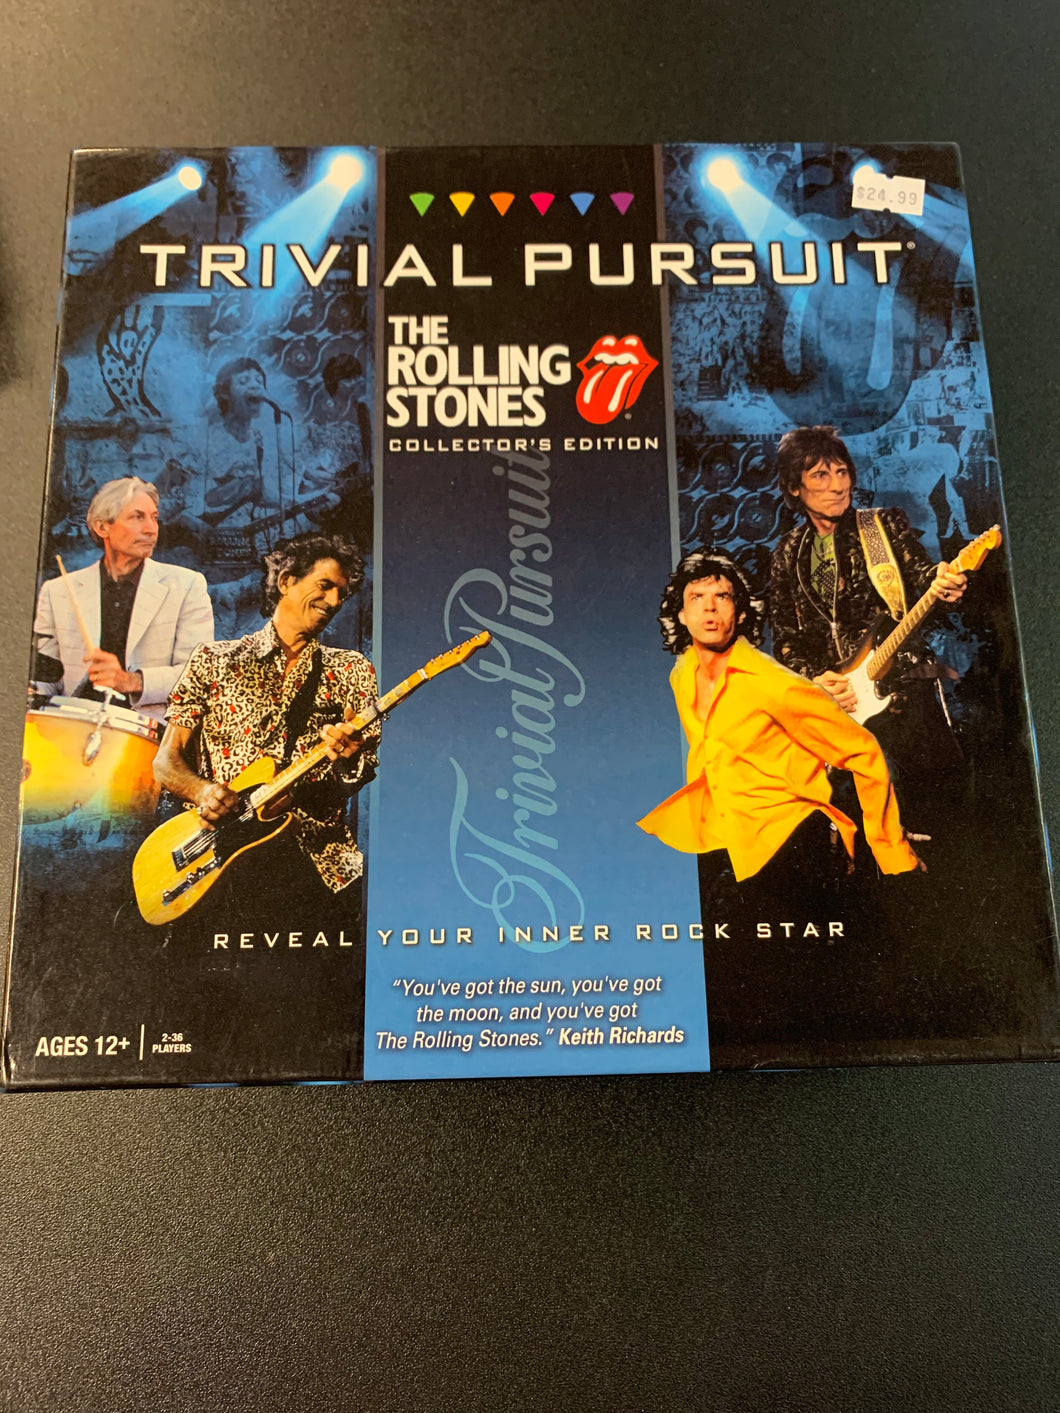 THE ROLLING STONES TRIVIAL PURSUIT OPEN BOX COMPLETE